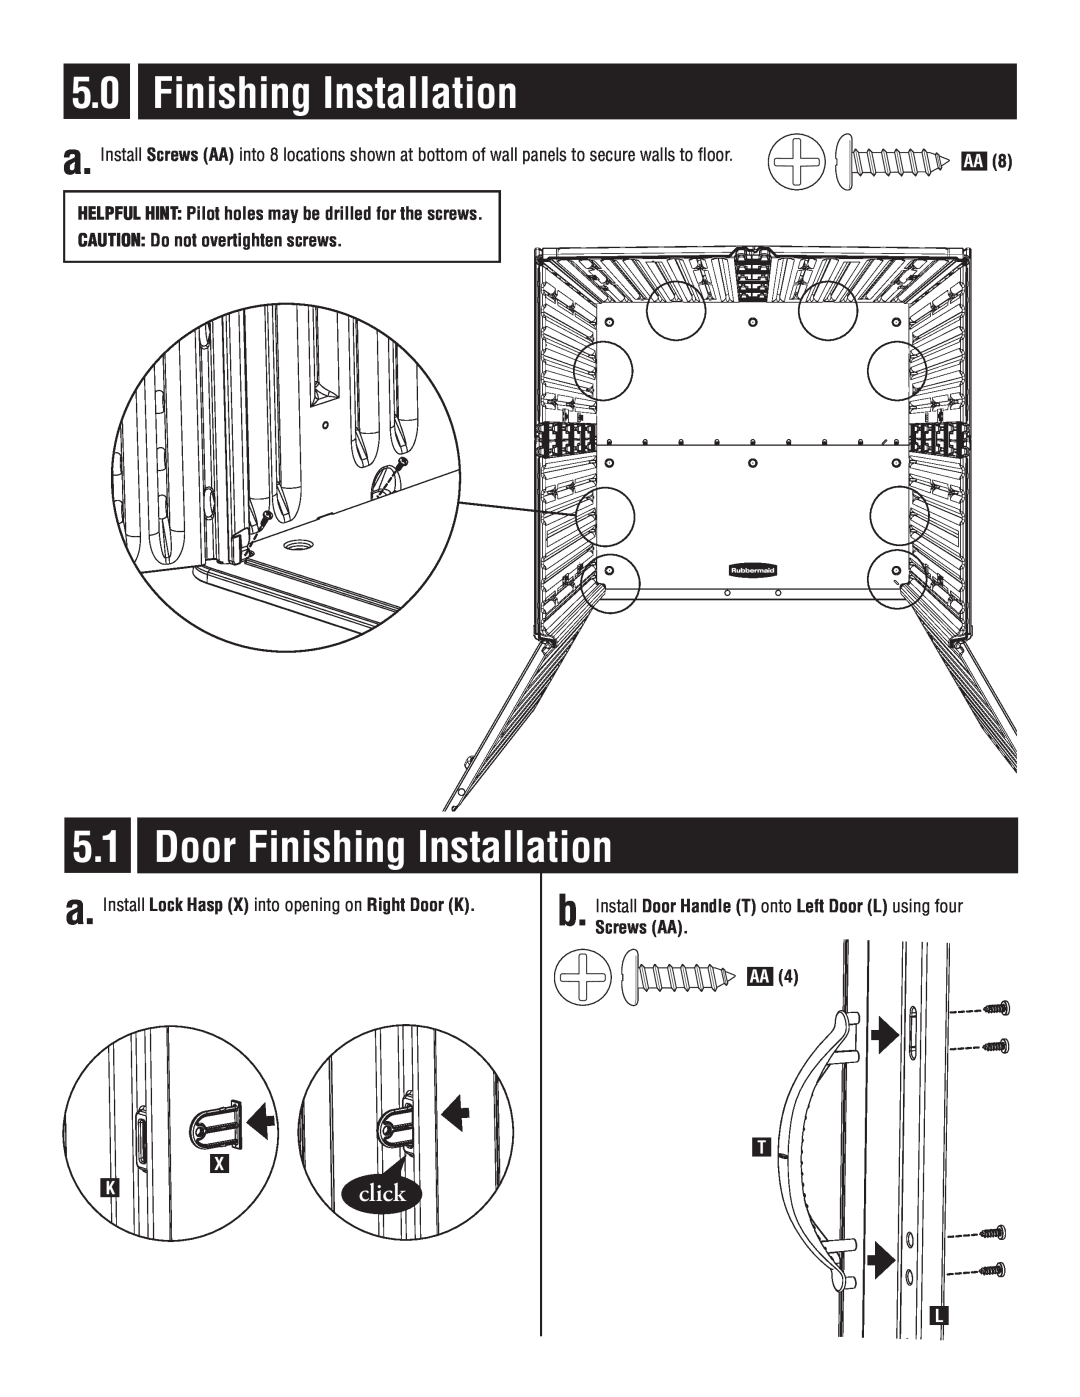 Rubbermaid P0-5L20-P0 Door Finishing Installation, click, HELPFUL HINT Pilot holes may be drilled for the screws 